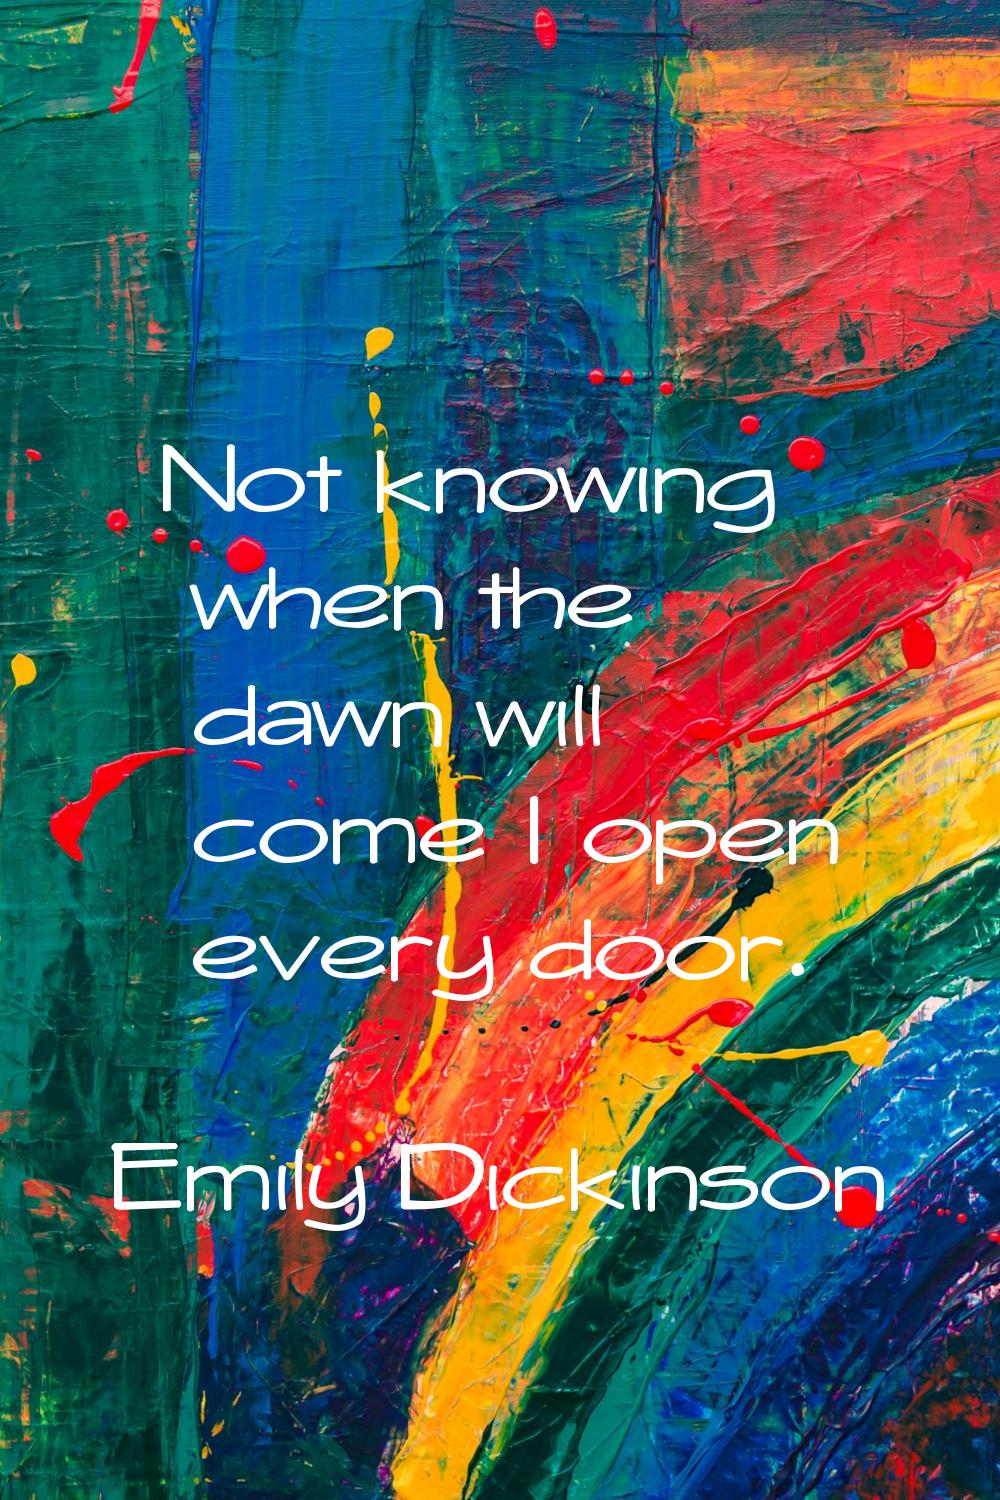 Not knowing when the dawn will come I open every door.